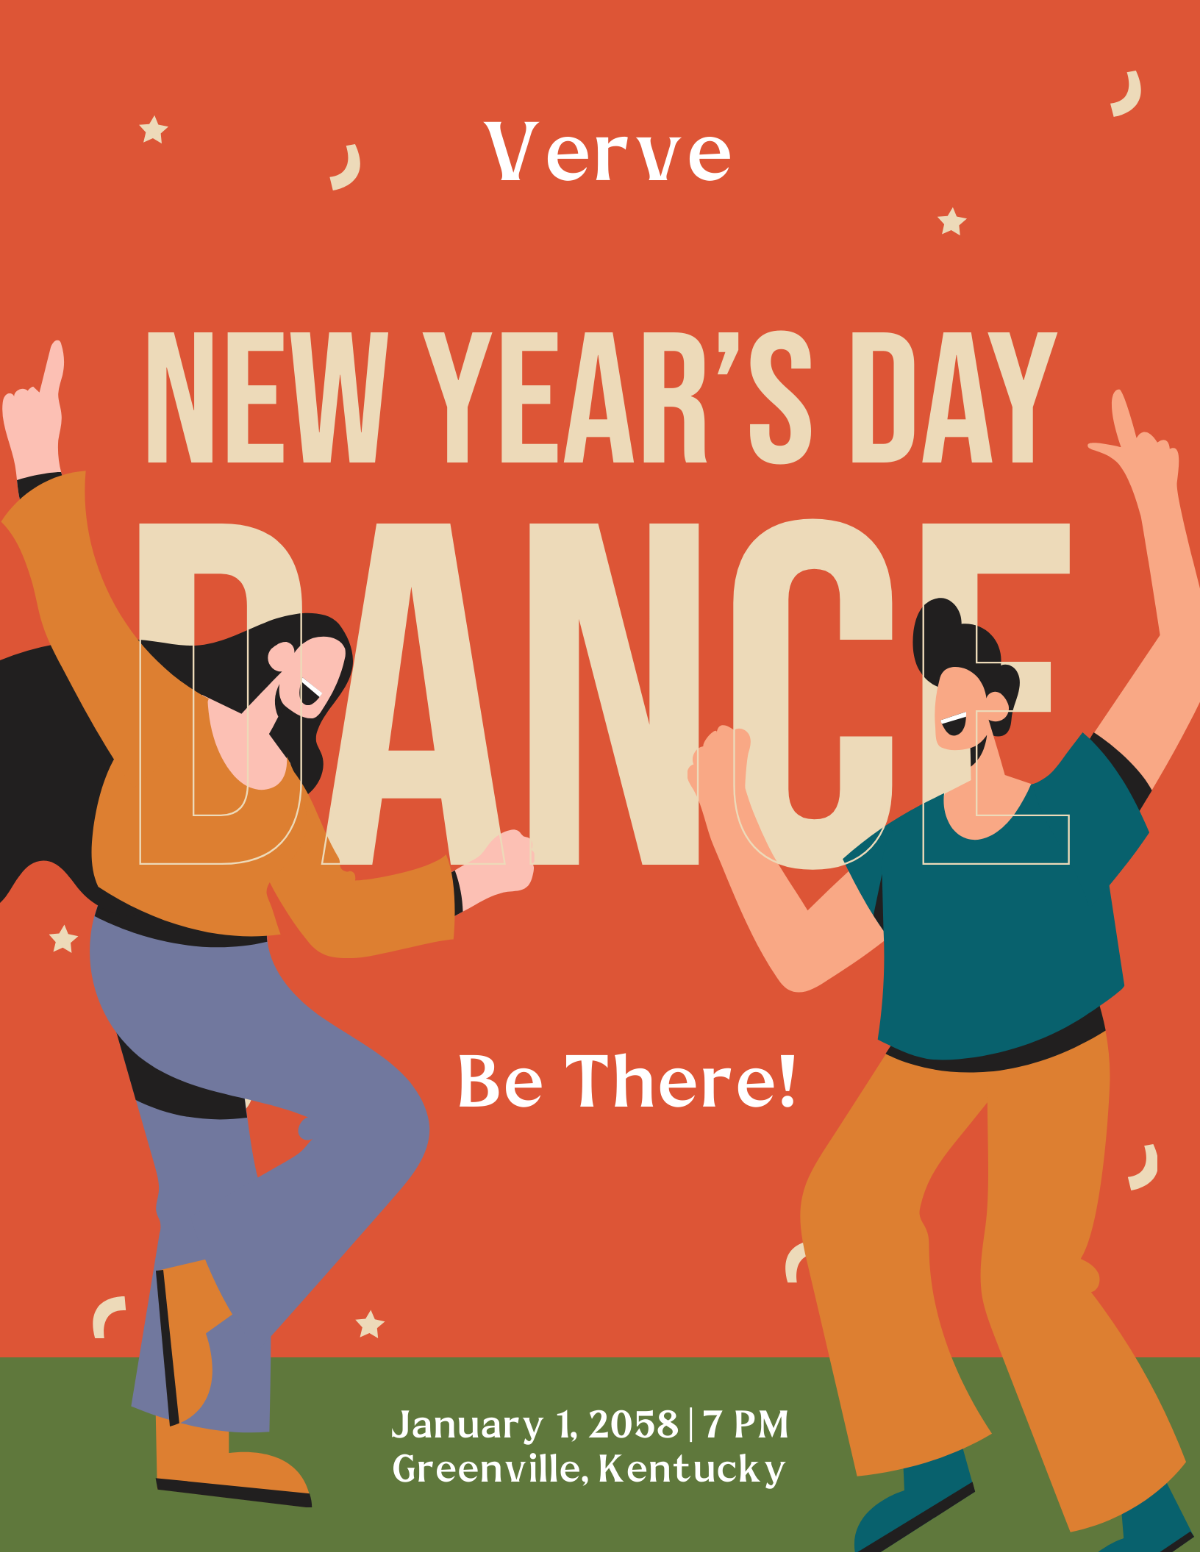 New Year's Day Mockup Flyer